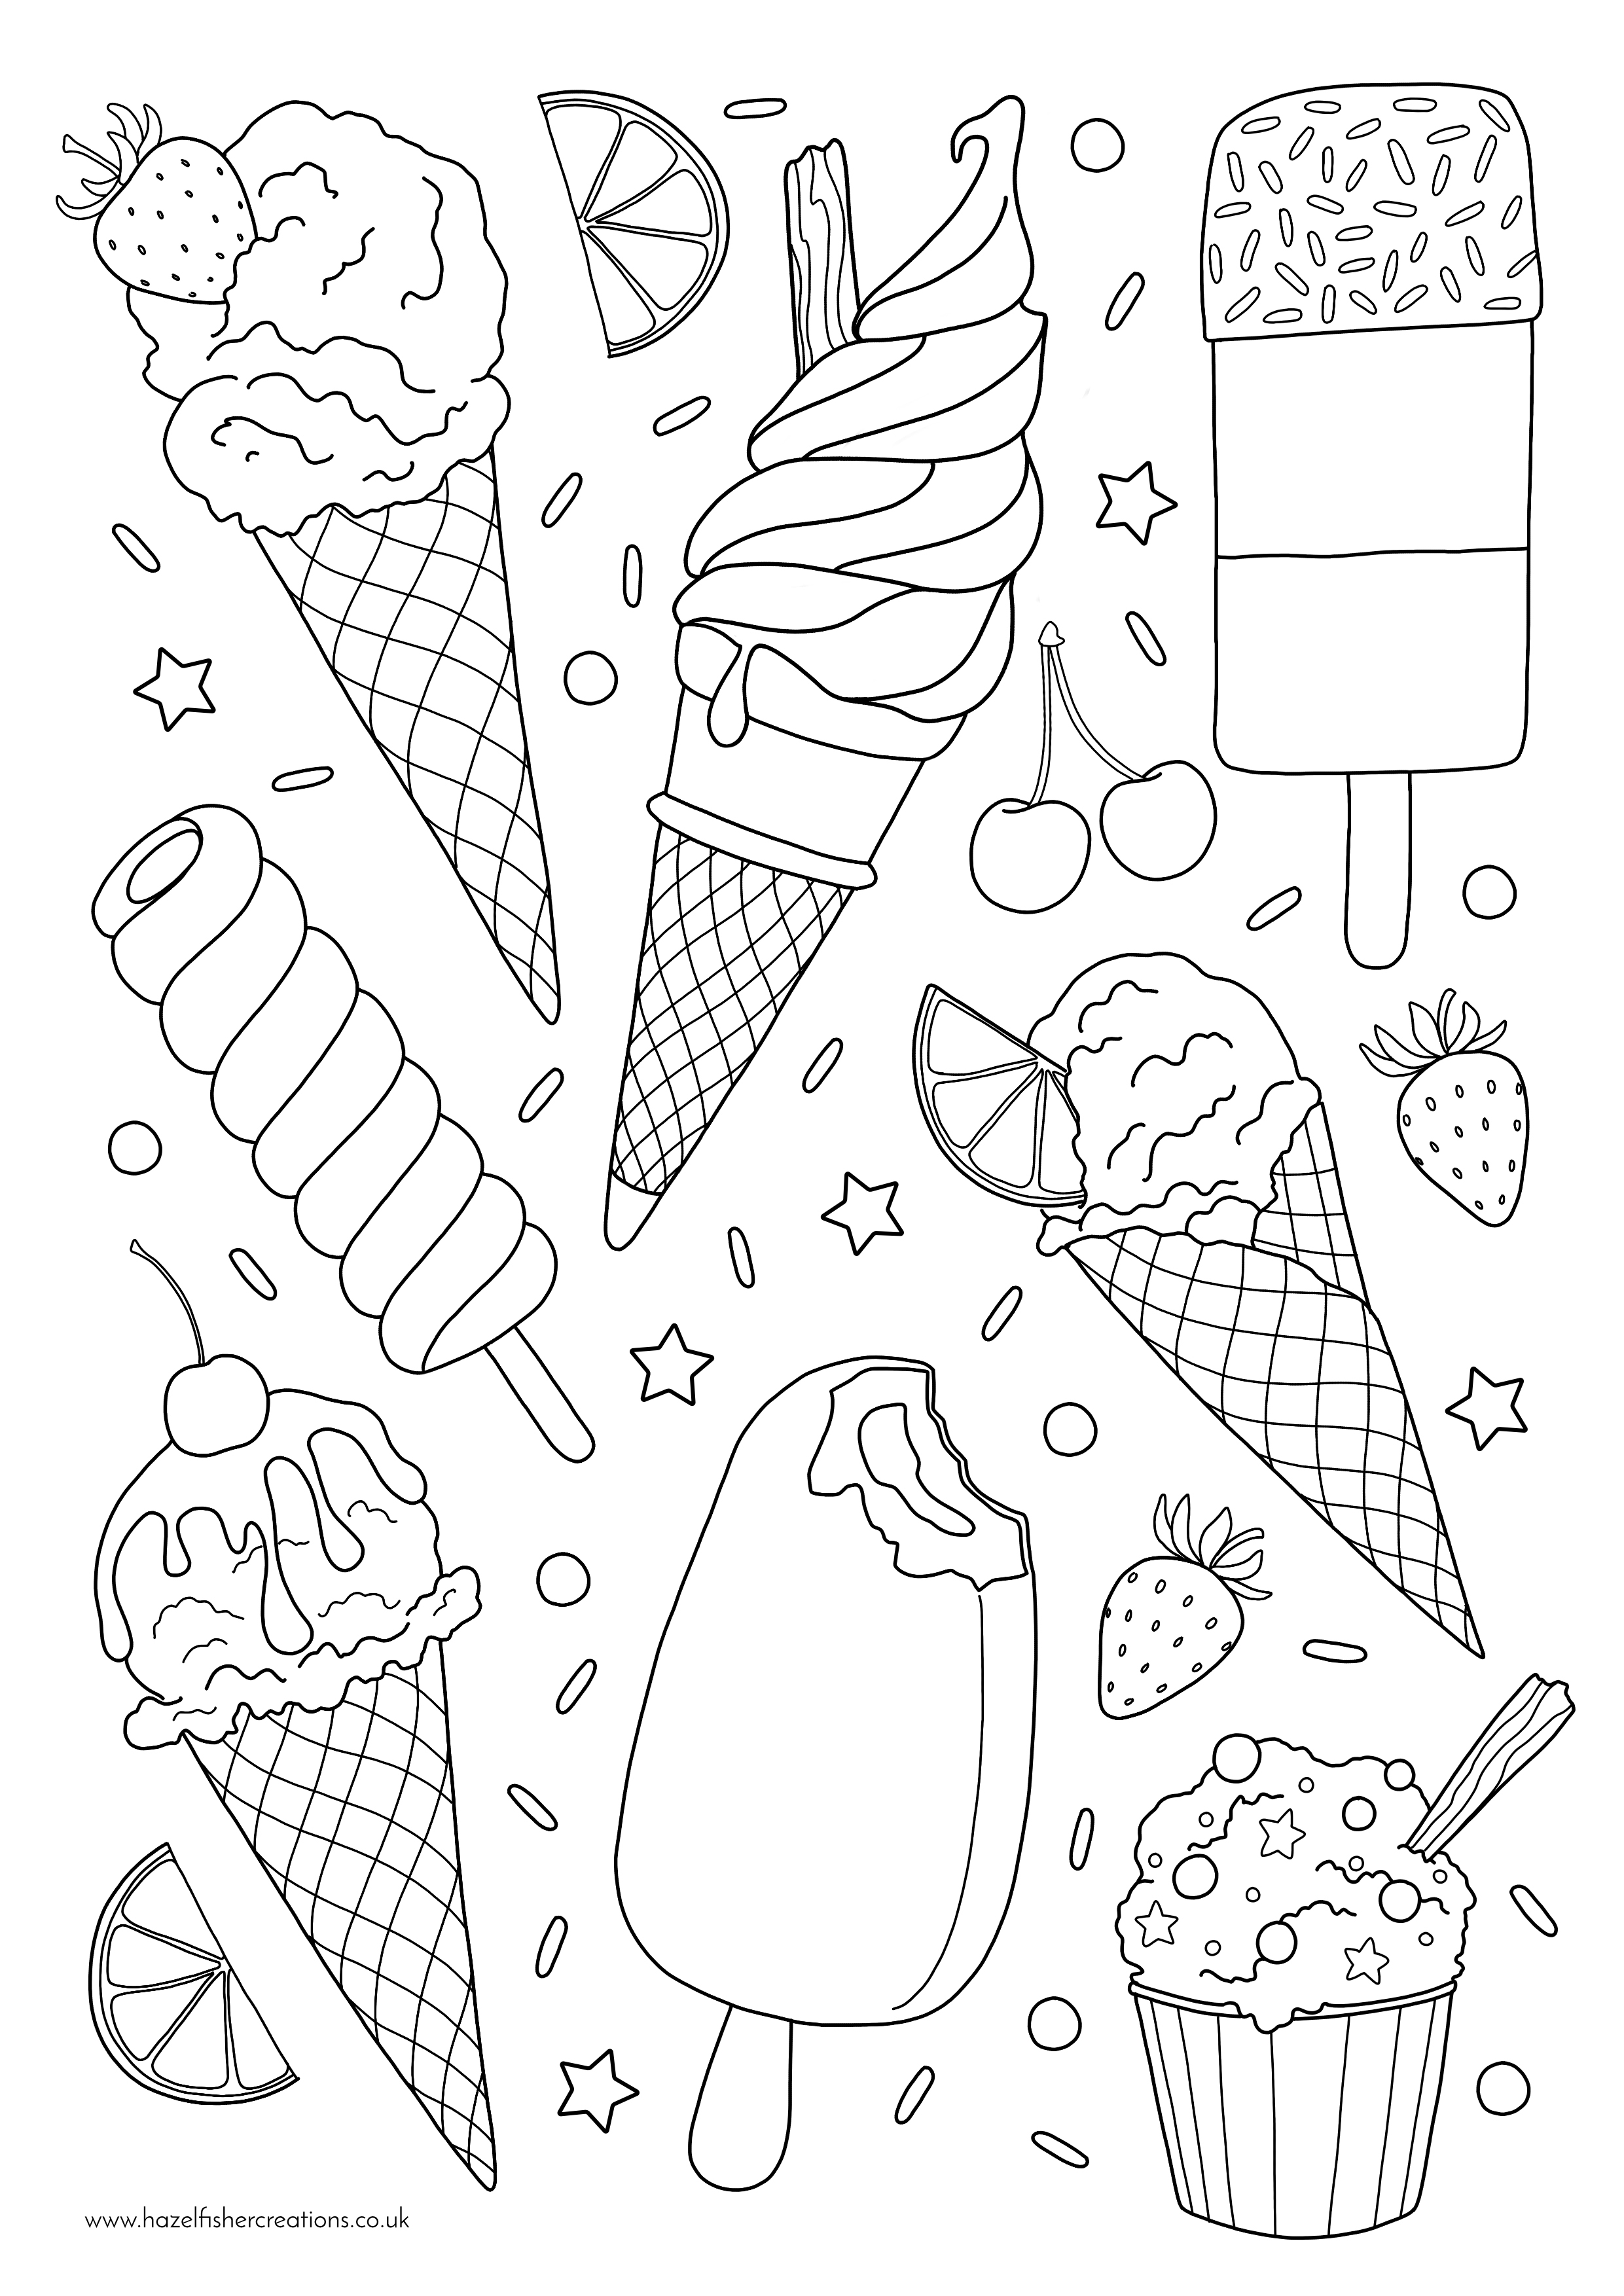 ice-cream-colouring-in-activity-sheet-printables